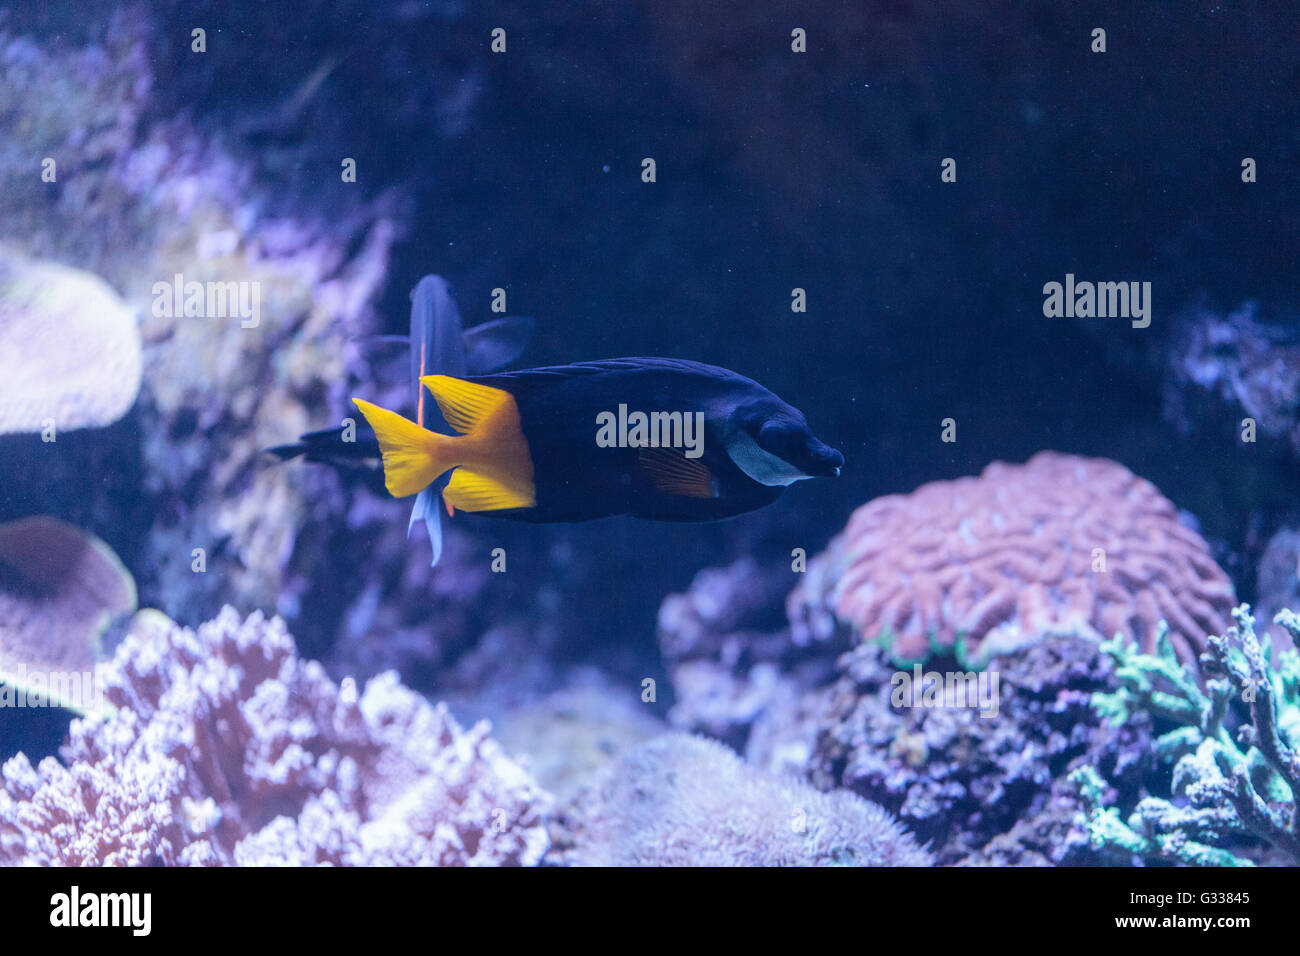 Bicolor Foxface rabbitfish, Siganus uspi, is a black fish with a yellow tail. Stock Photo